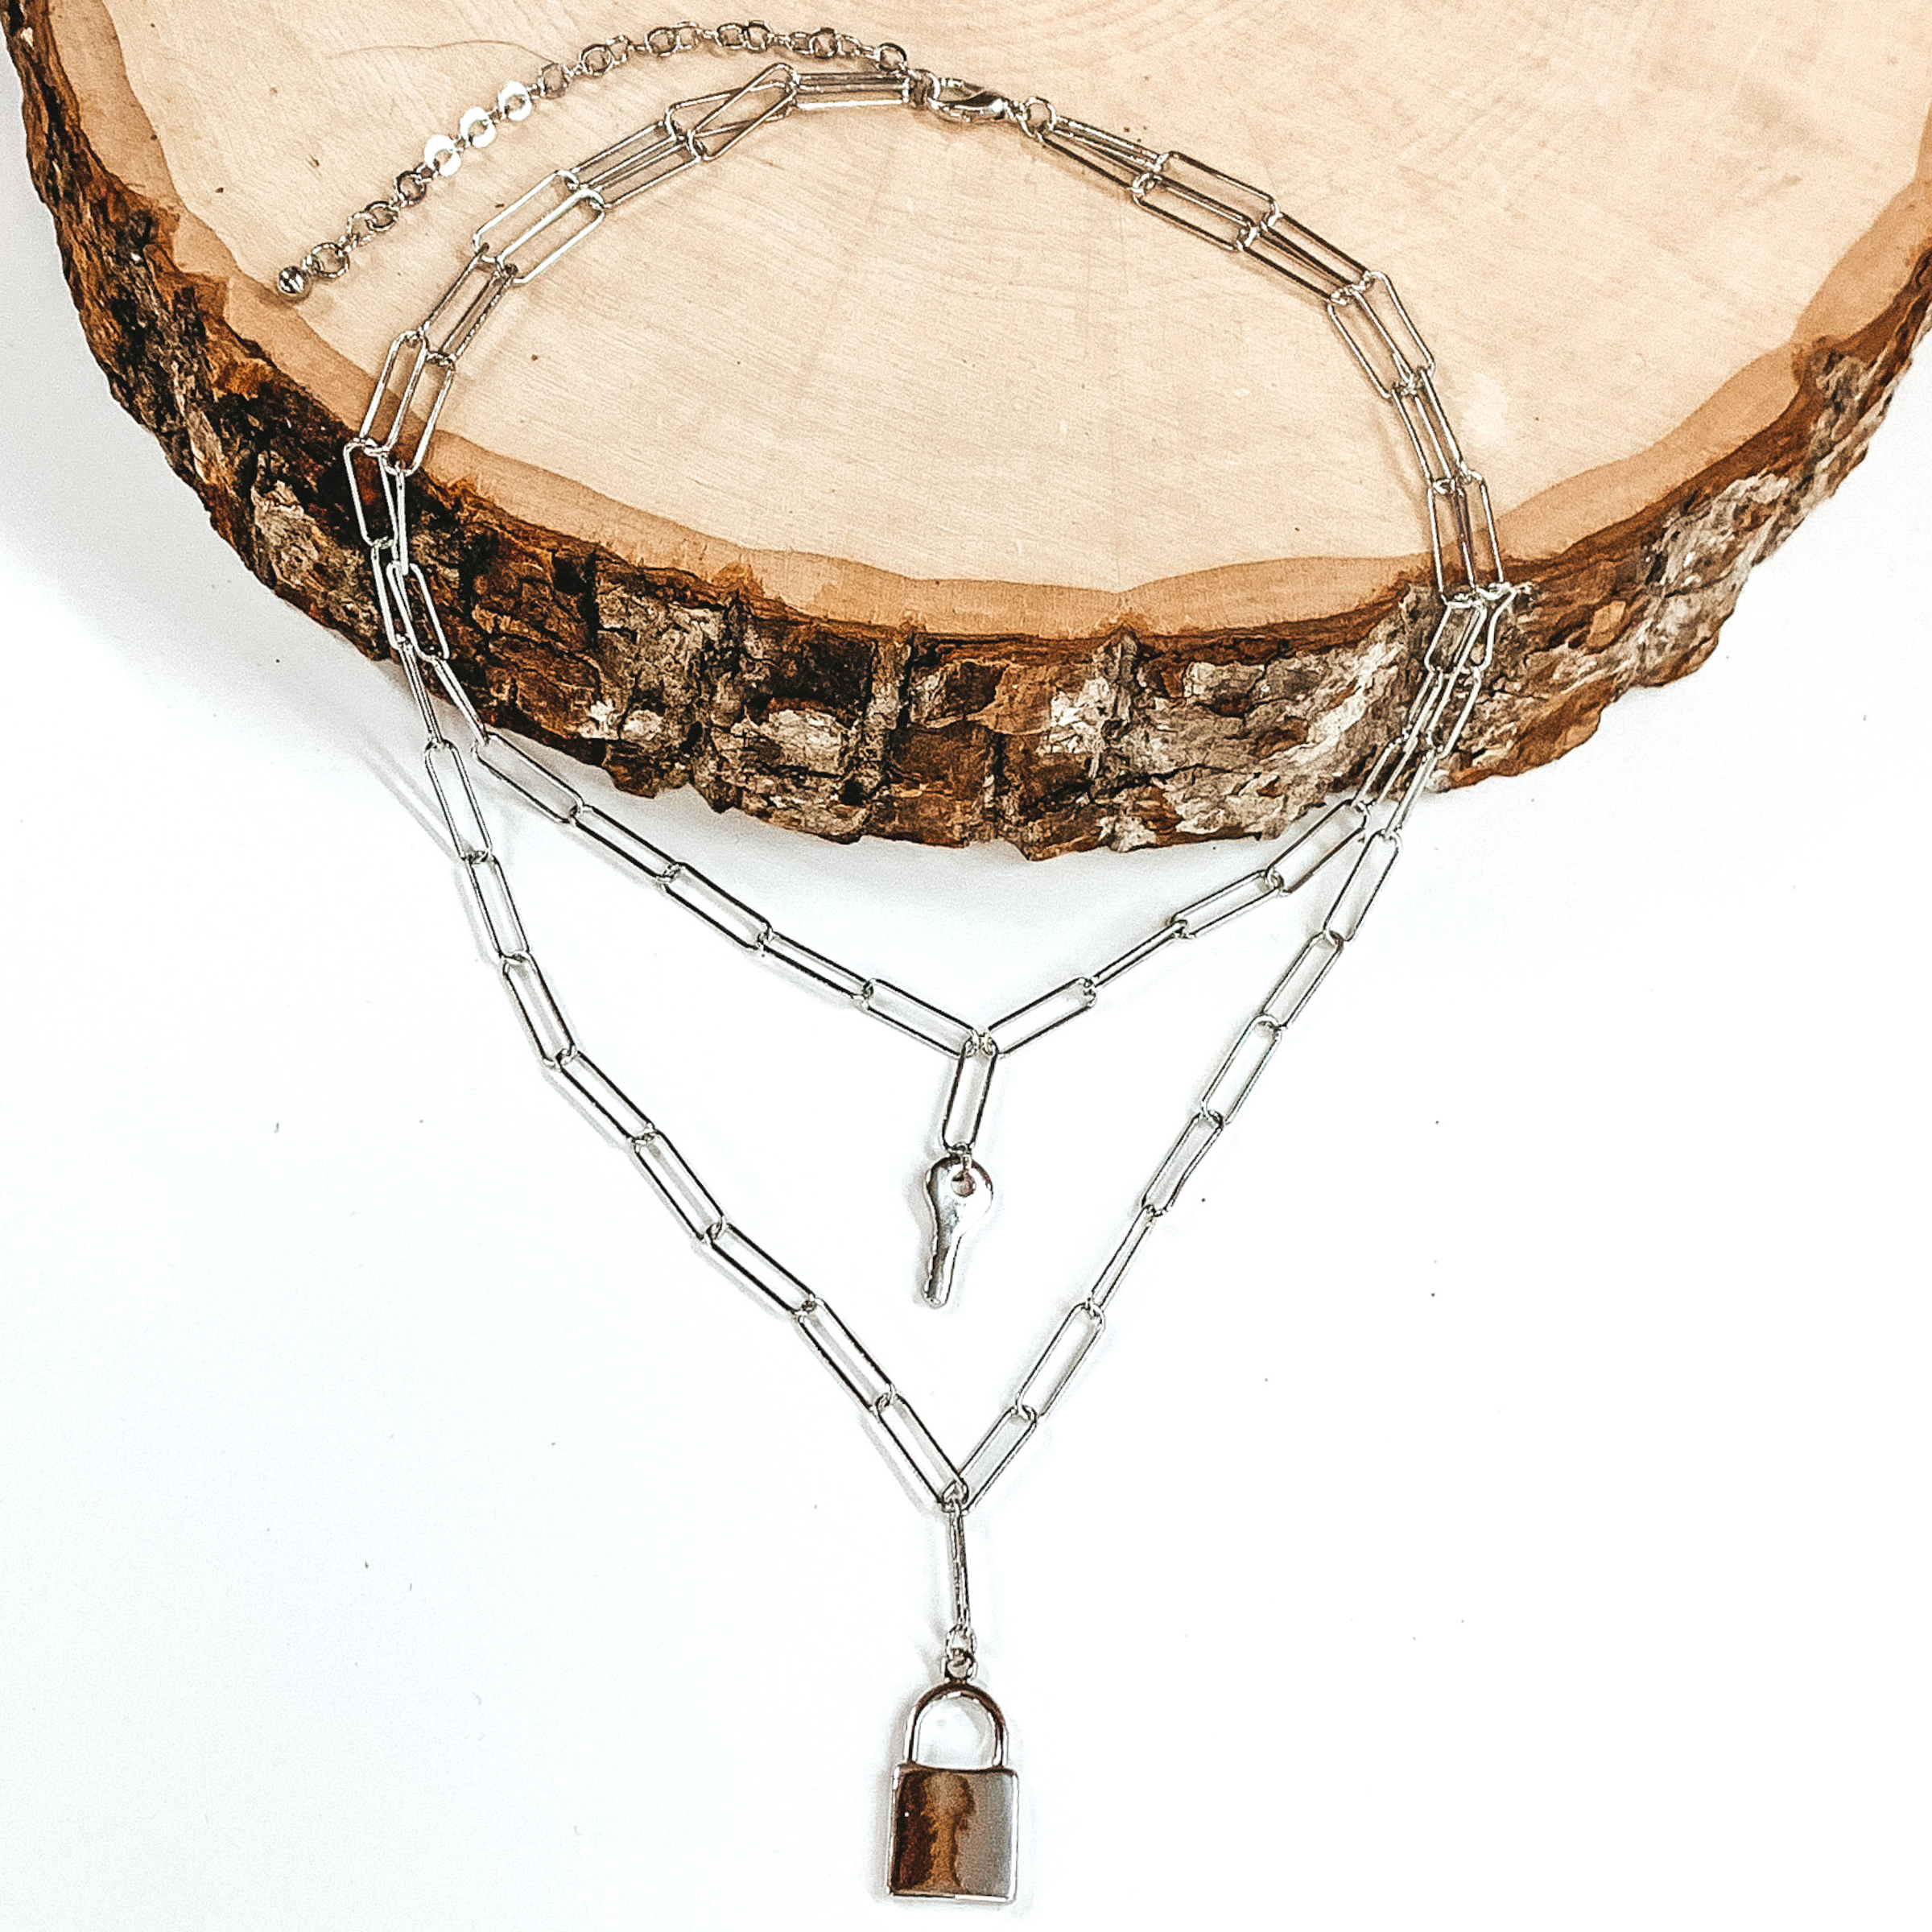 Silver double chain linked necklace. the shorter strand has a key charm and the longer strand has a lock charm. This necklace is pictured laying partially on a piece of wood on a white background. 